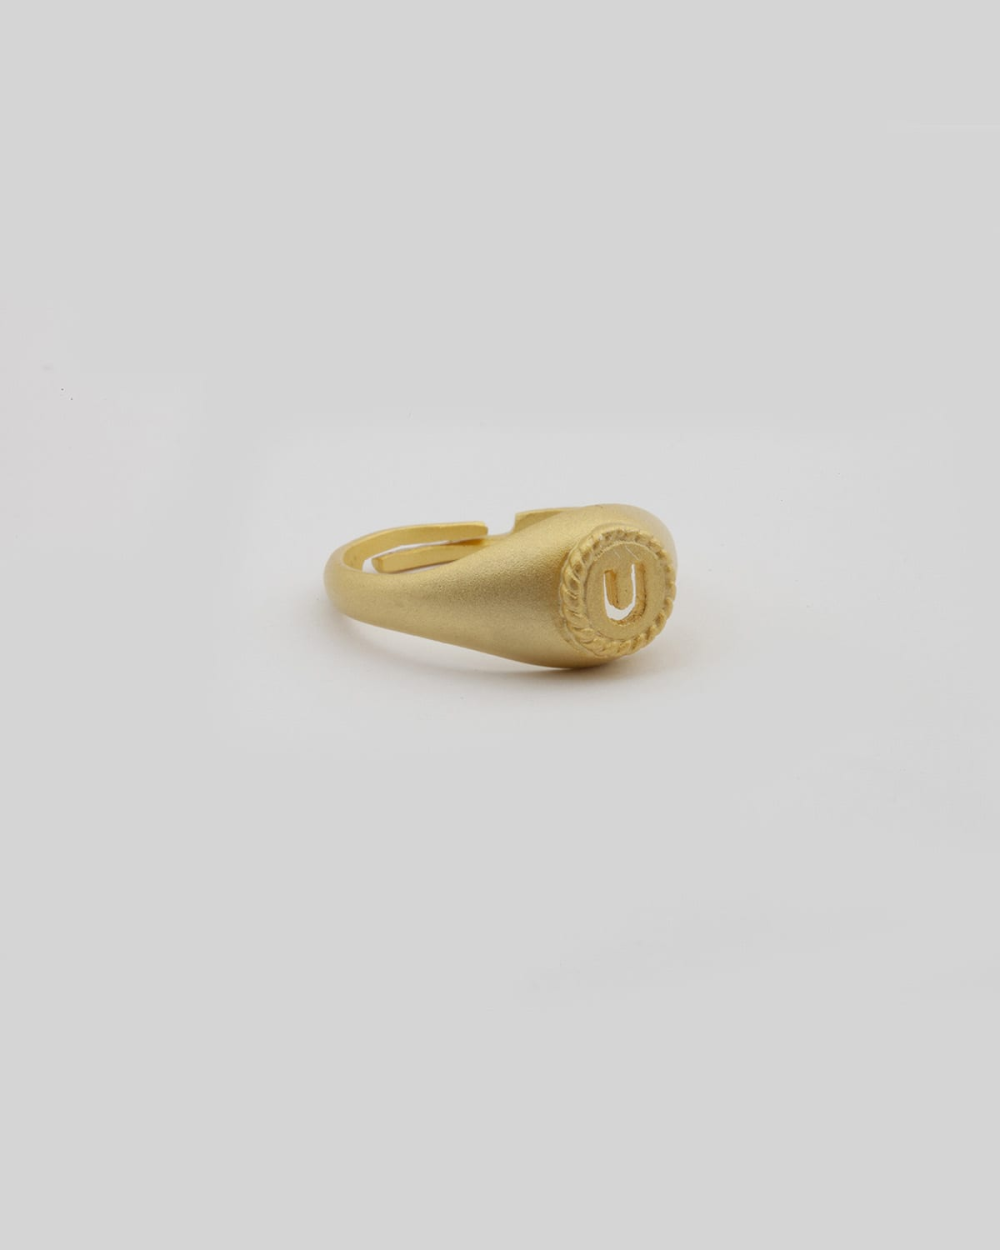 YELLOW GOLD ADJUSTABLE LETTER RING